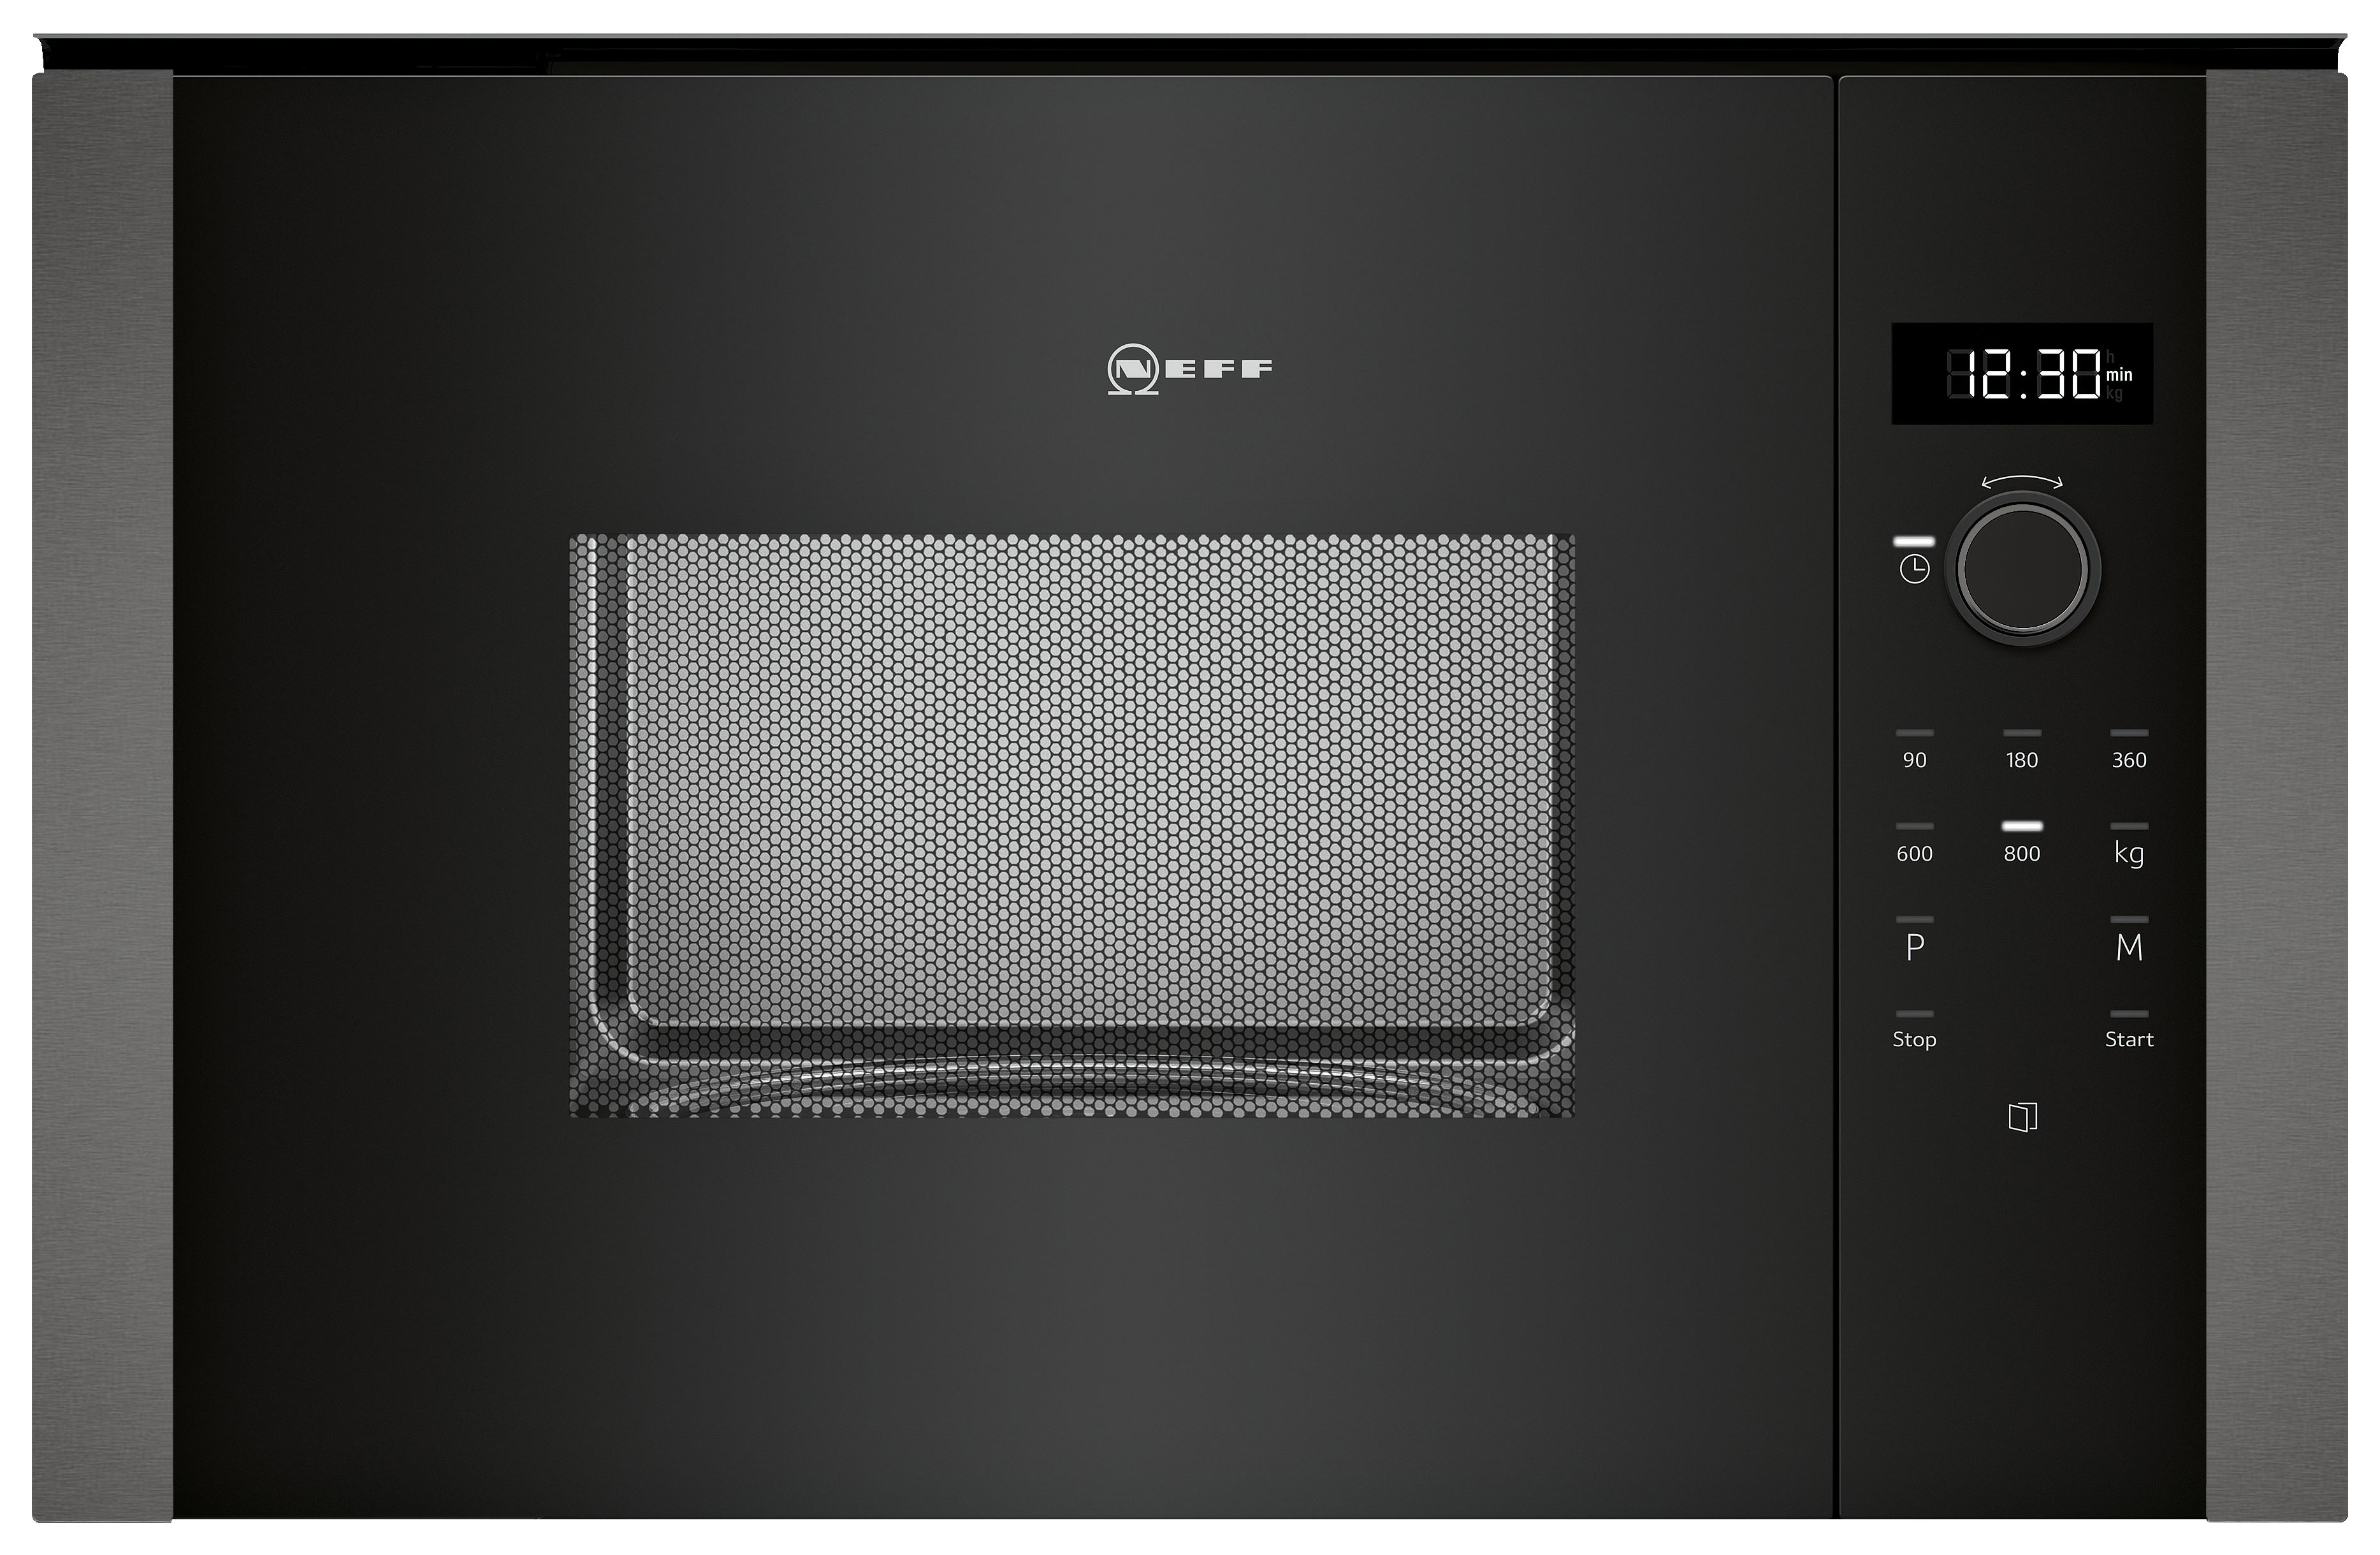 NEFF HLAWD23G0B N50 Built-in Microwave Oven - Graphite Grey